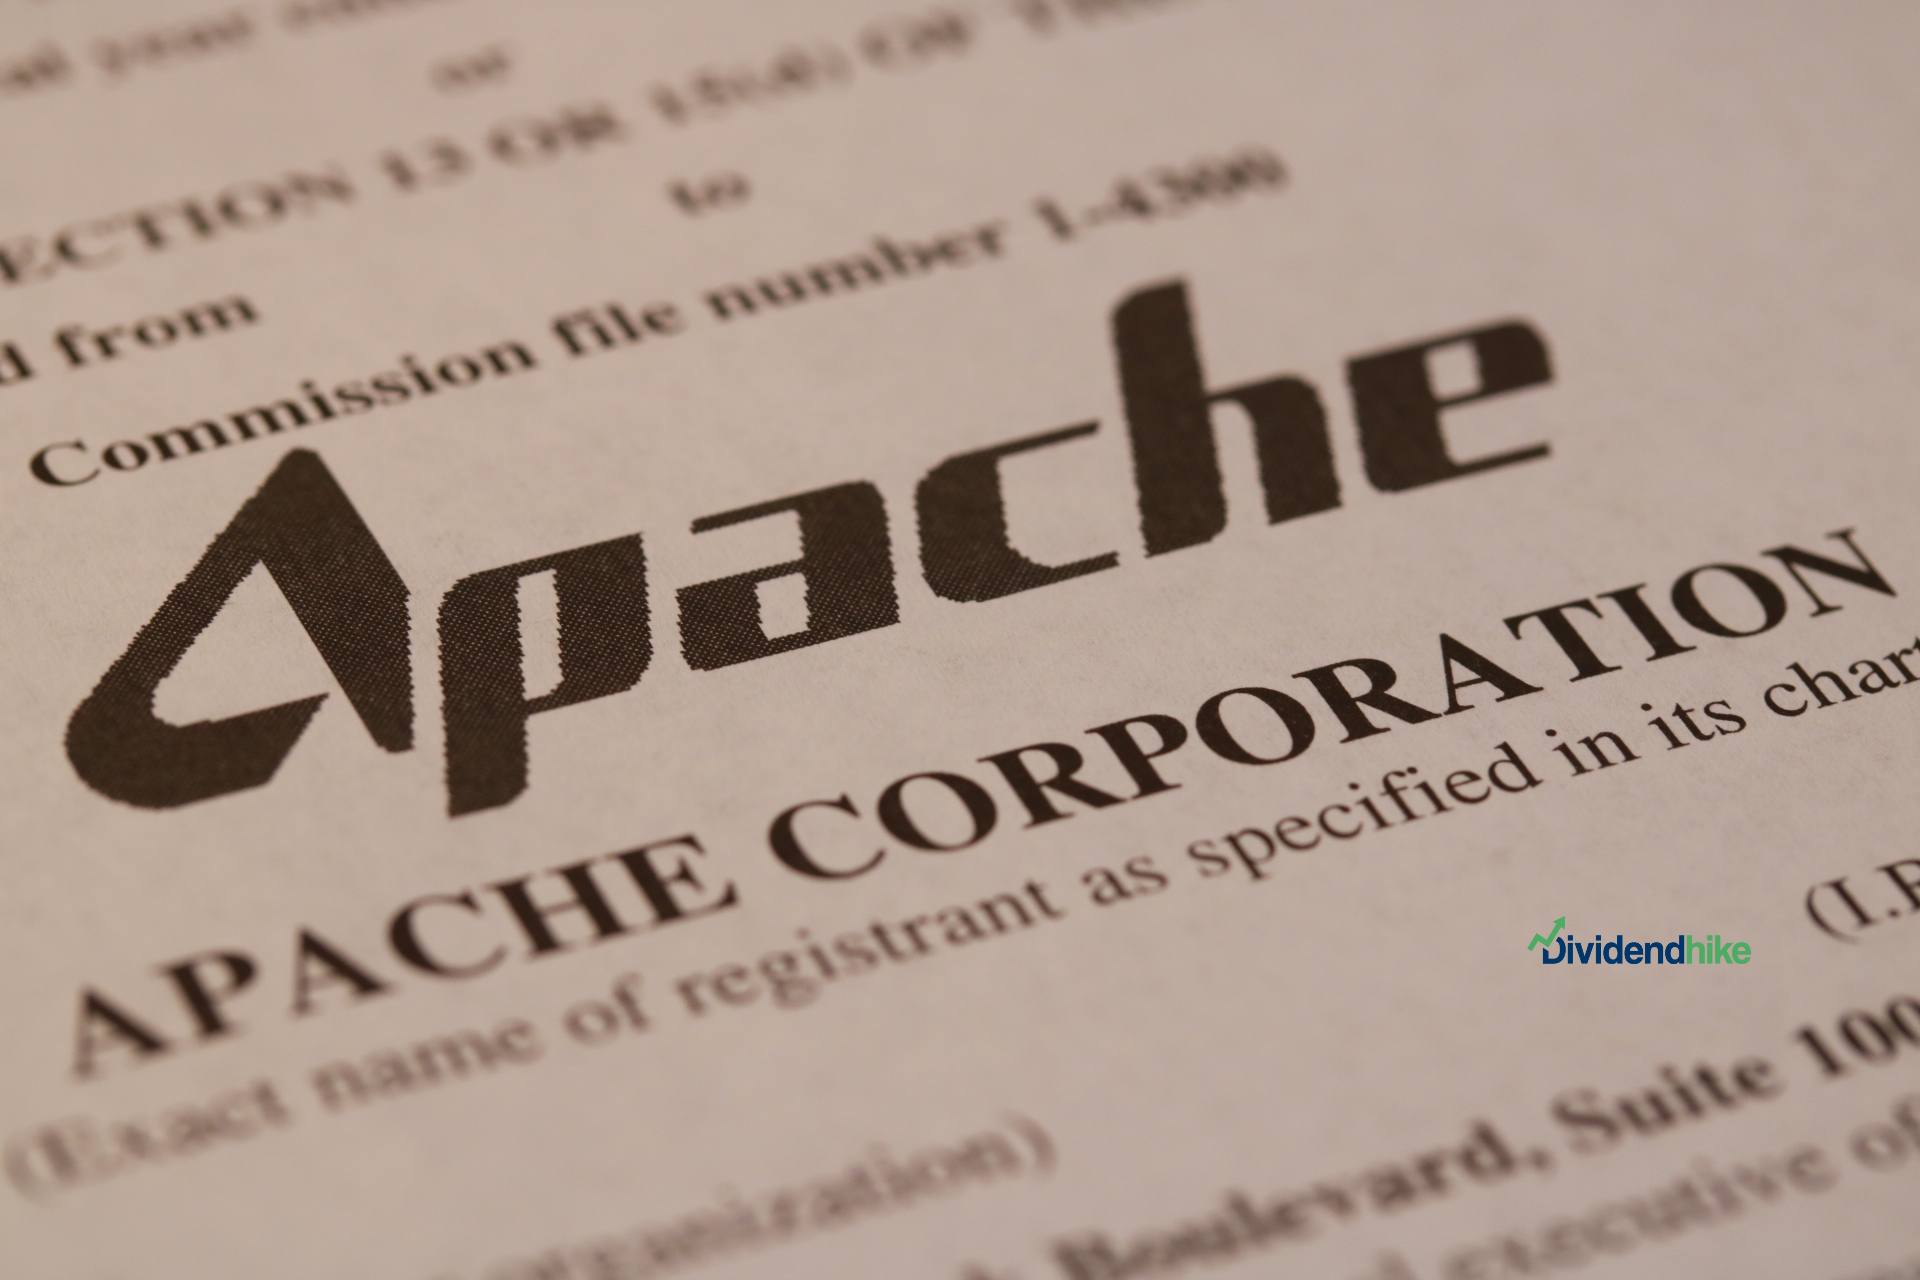 APA Corp was previously known as Apache | image: dividendhike.com